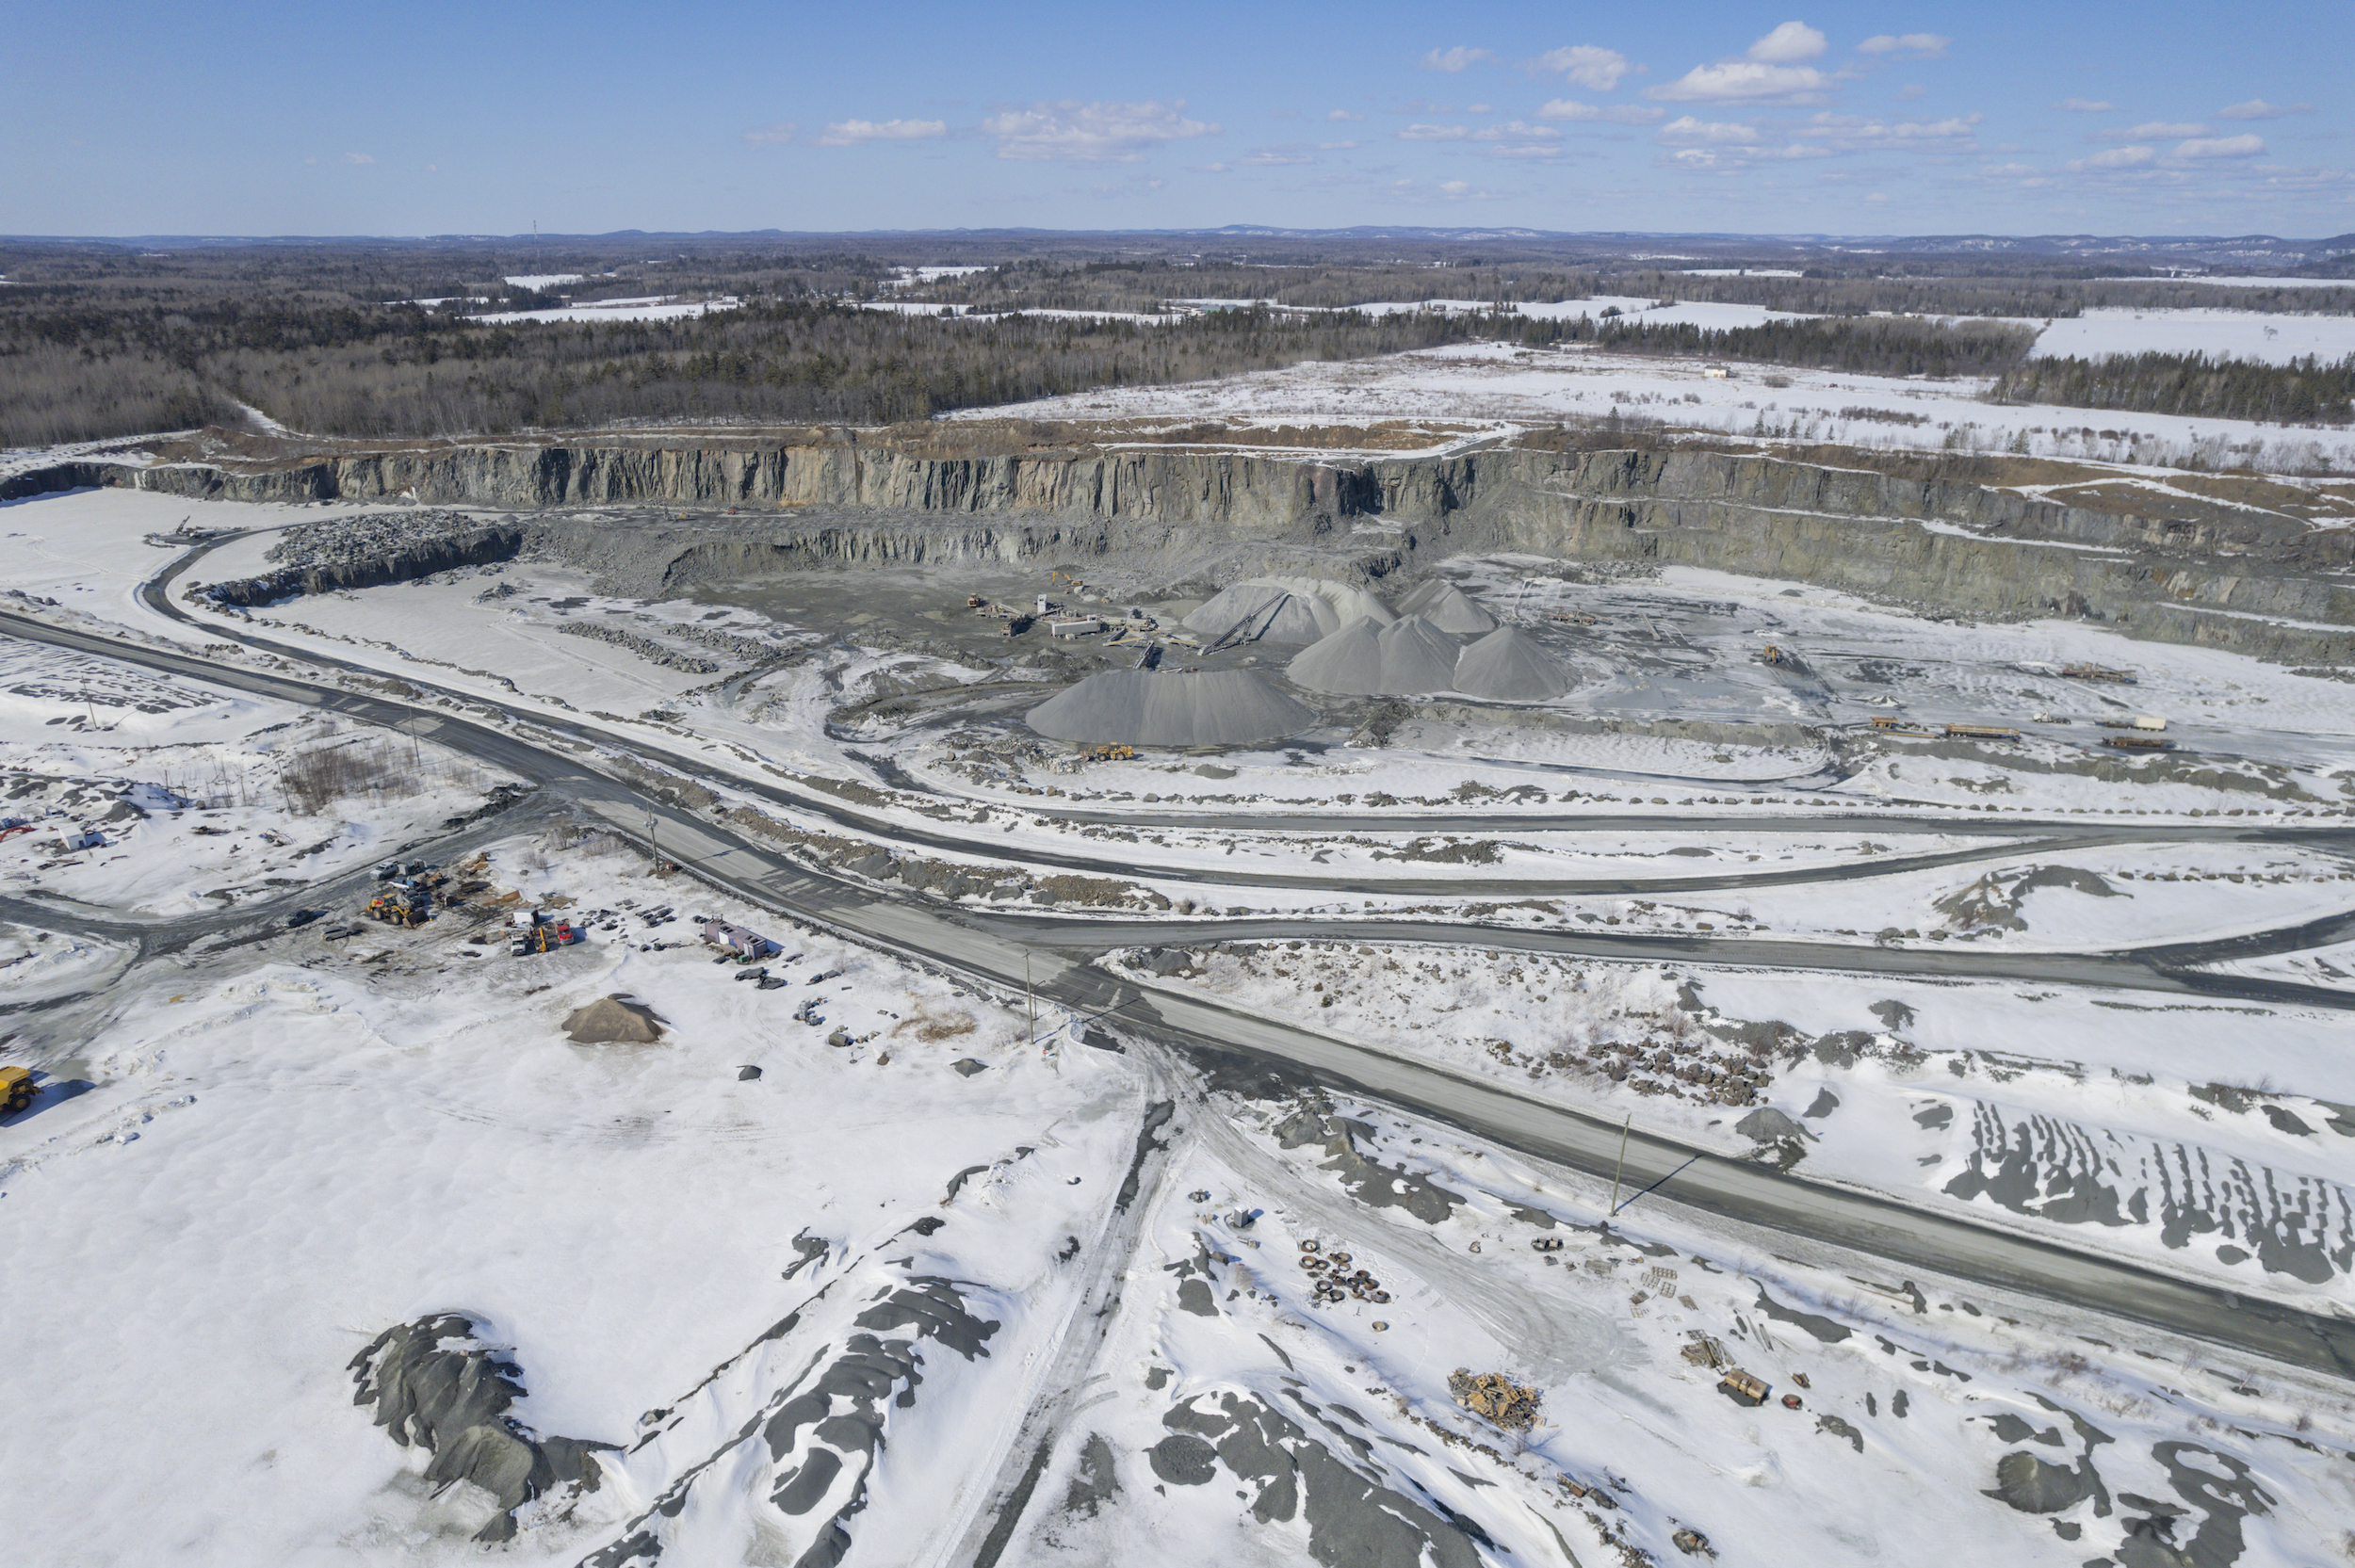 Since mining began in Sudbury, the industry has generated $330 billion in revenue based on contemporary mineral prices. But the annuity paid to First Nations signatories of the Robinson Huron Treaty in that time was only raised once, in 1875, from $1.70 to four dollars per person, which members can still receive each year. Photo: Jeff Dixon / The Narwhal